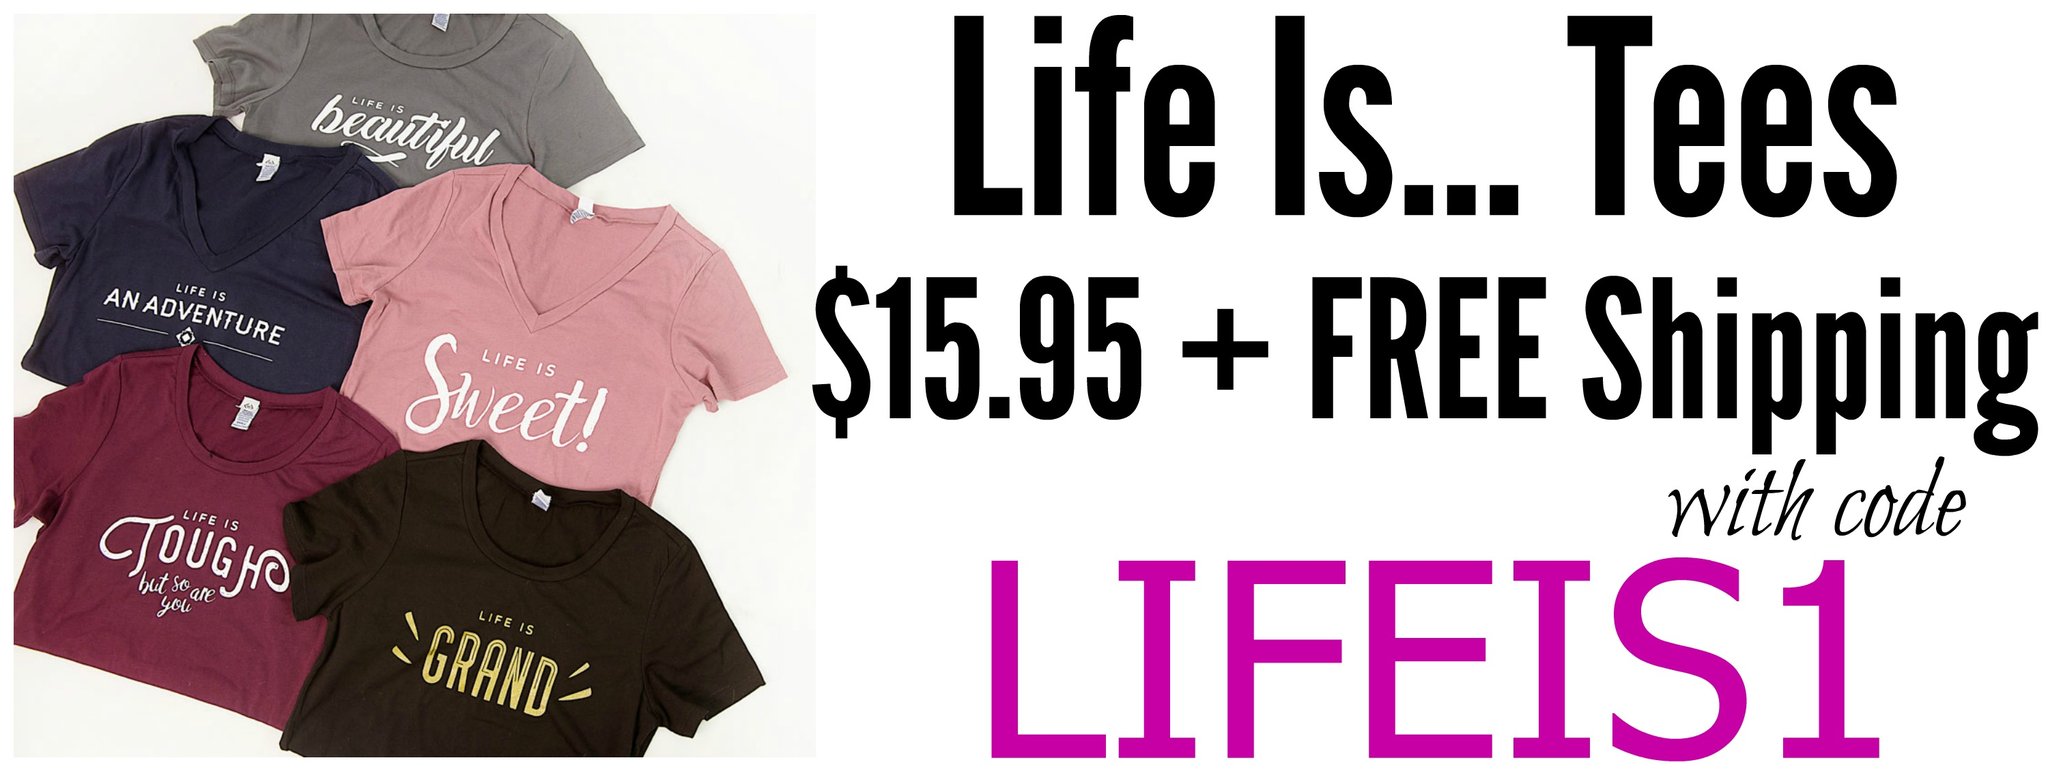 “Life Is…” Tees Only $15.95 + FREE Shipping!